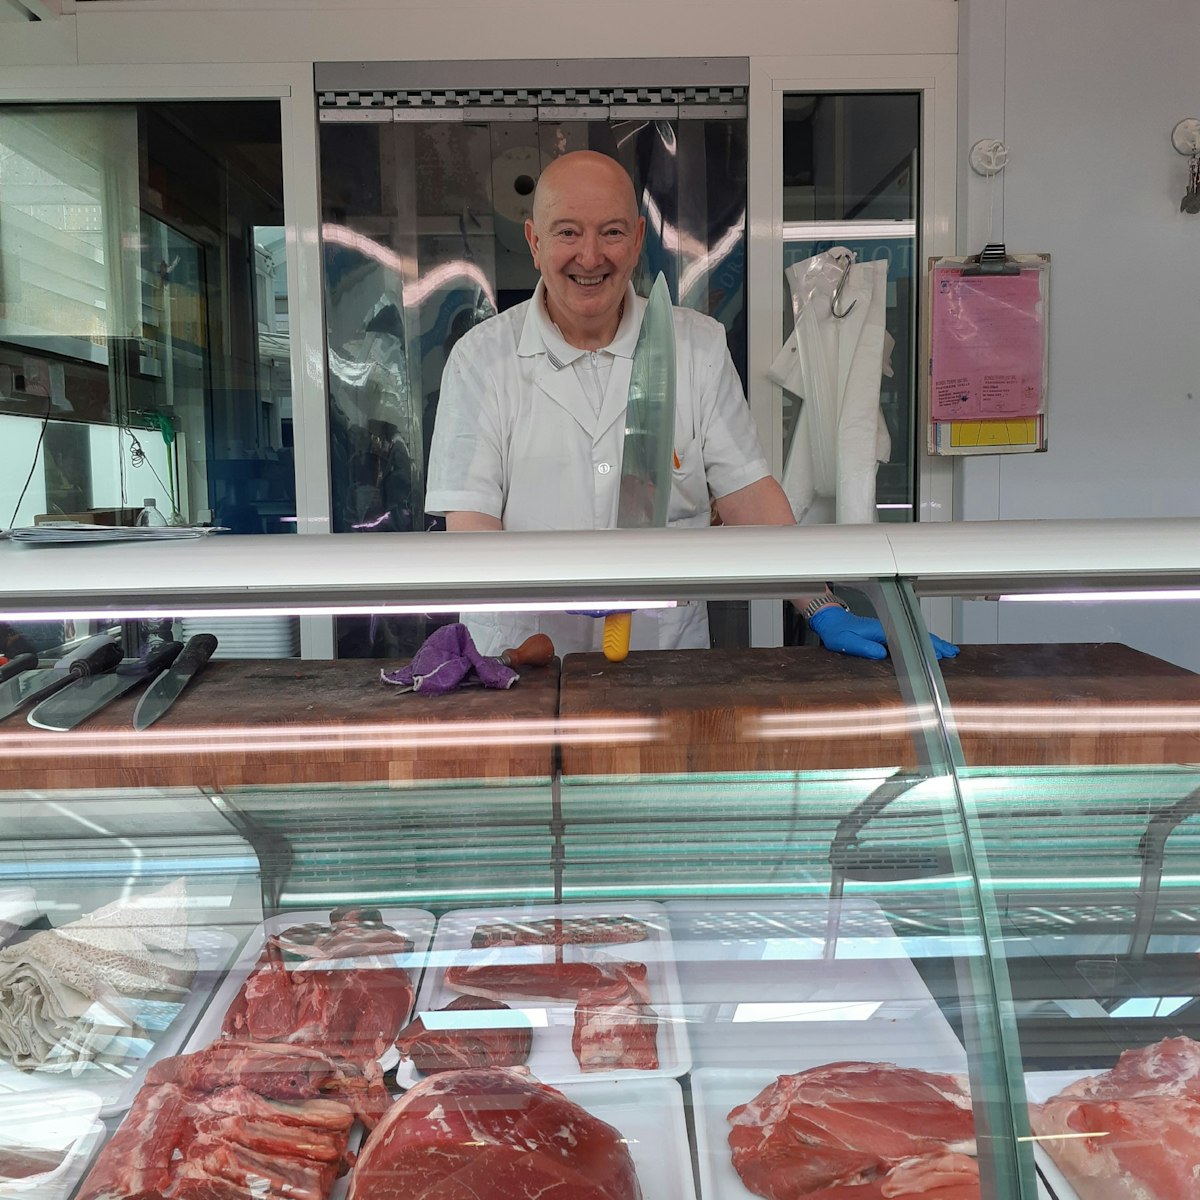 One of the vendors at the historic Mercato Testaccio, Cesare the butcher (he's the fourth generation in his family to run the business).